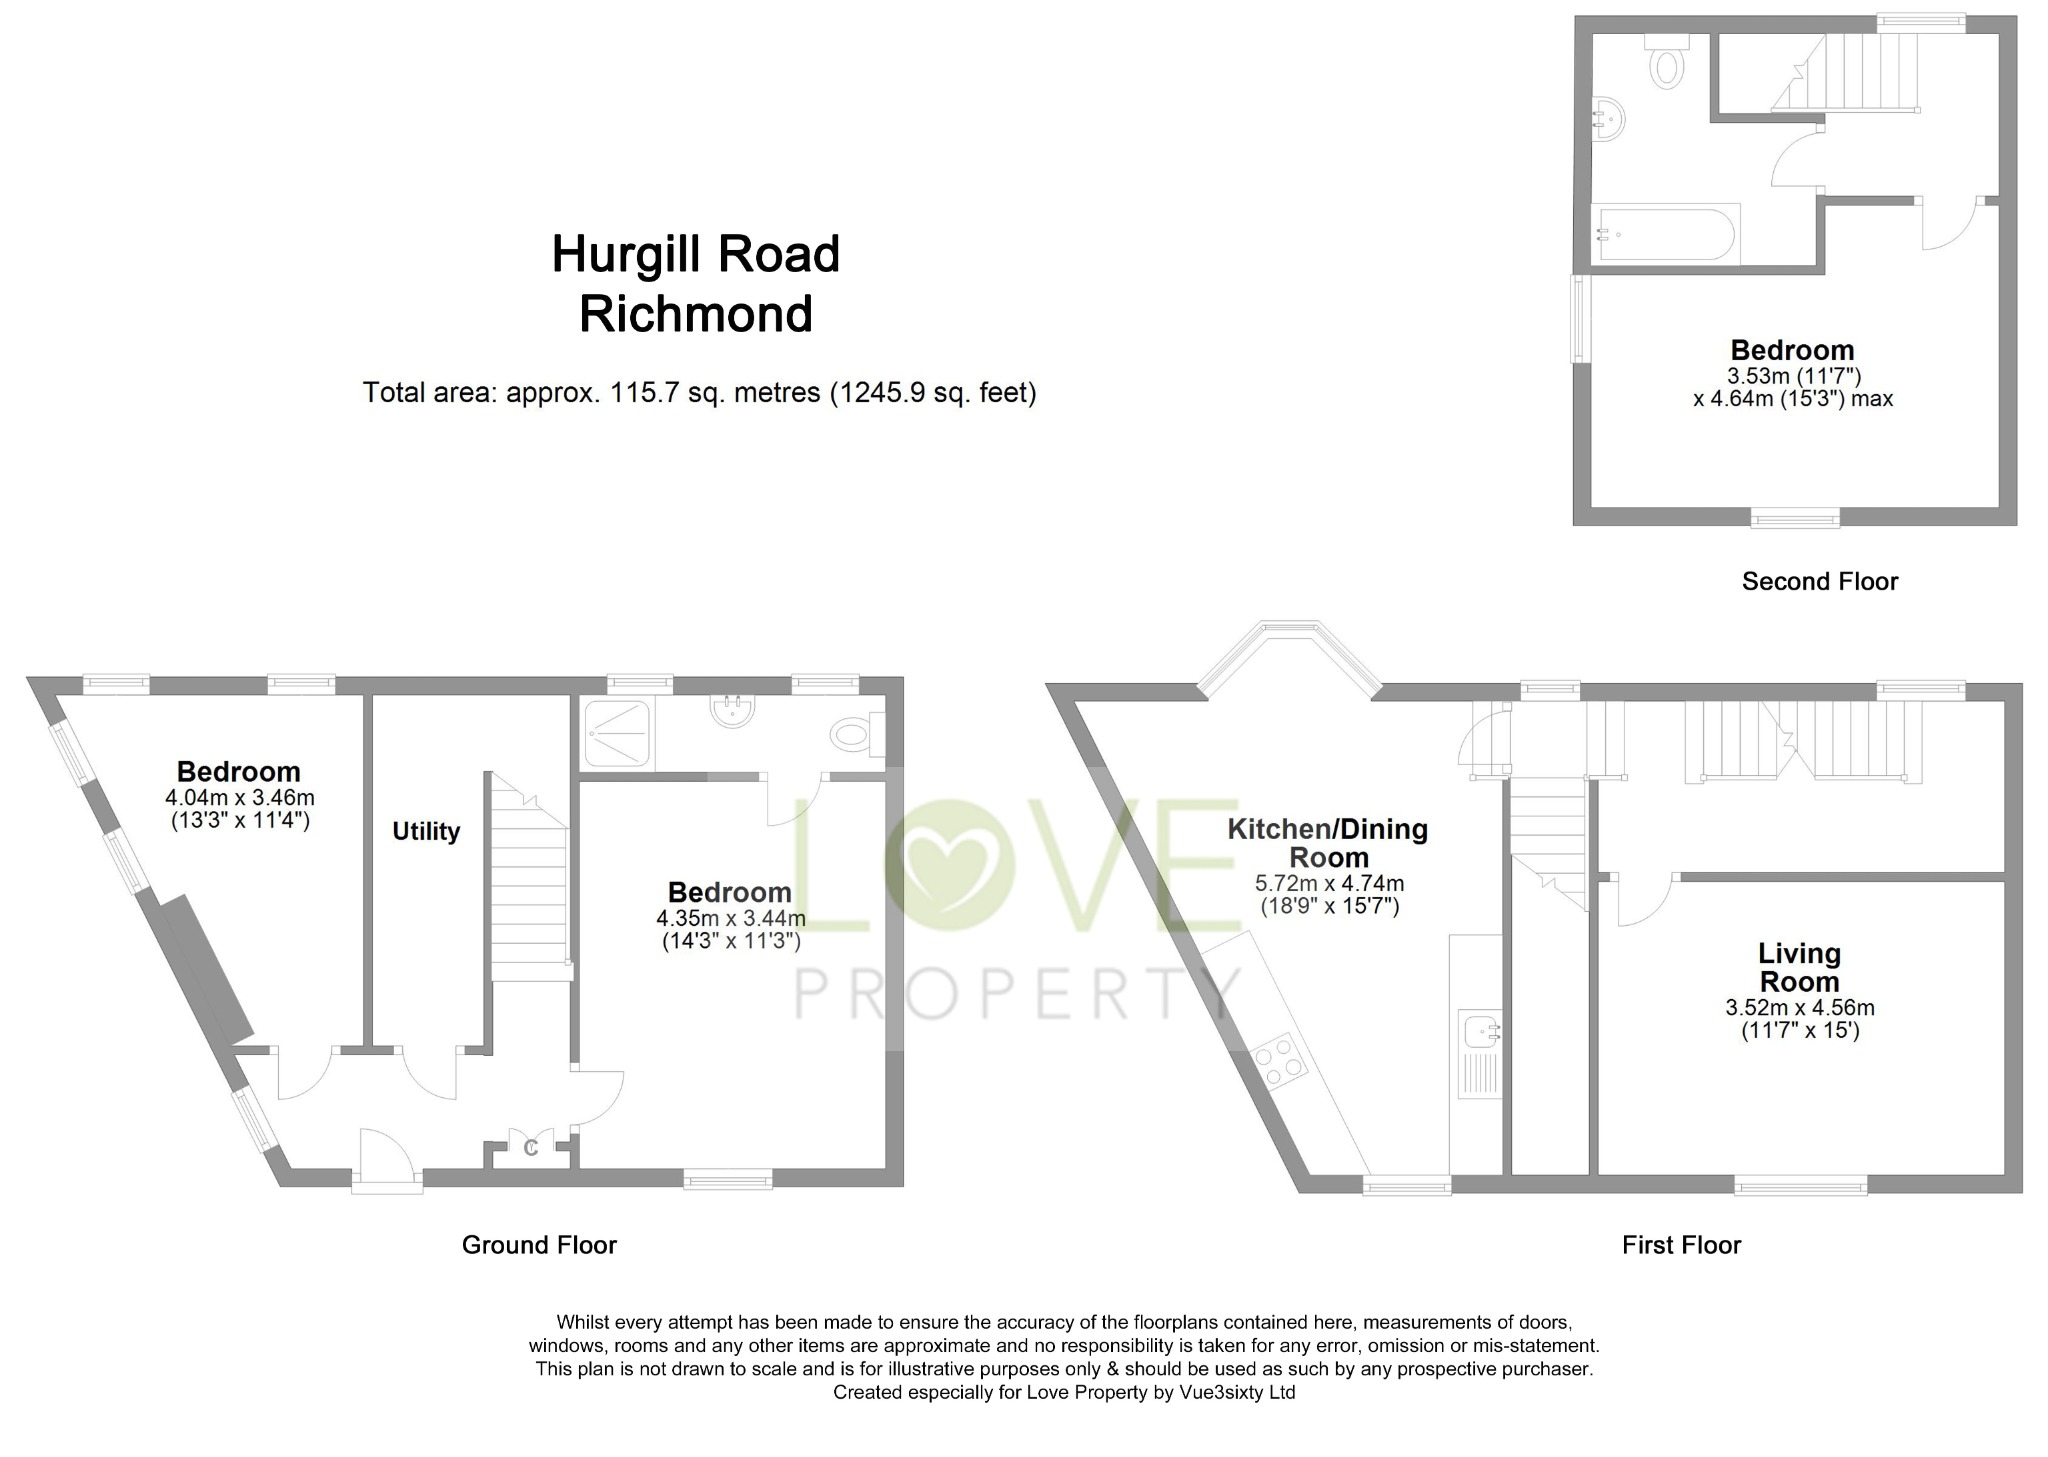 3 bed cottage to rent in Hurgill Road, Richmond - Property floorplan